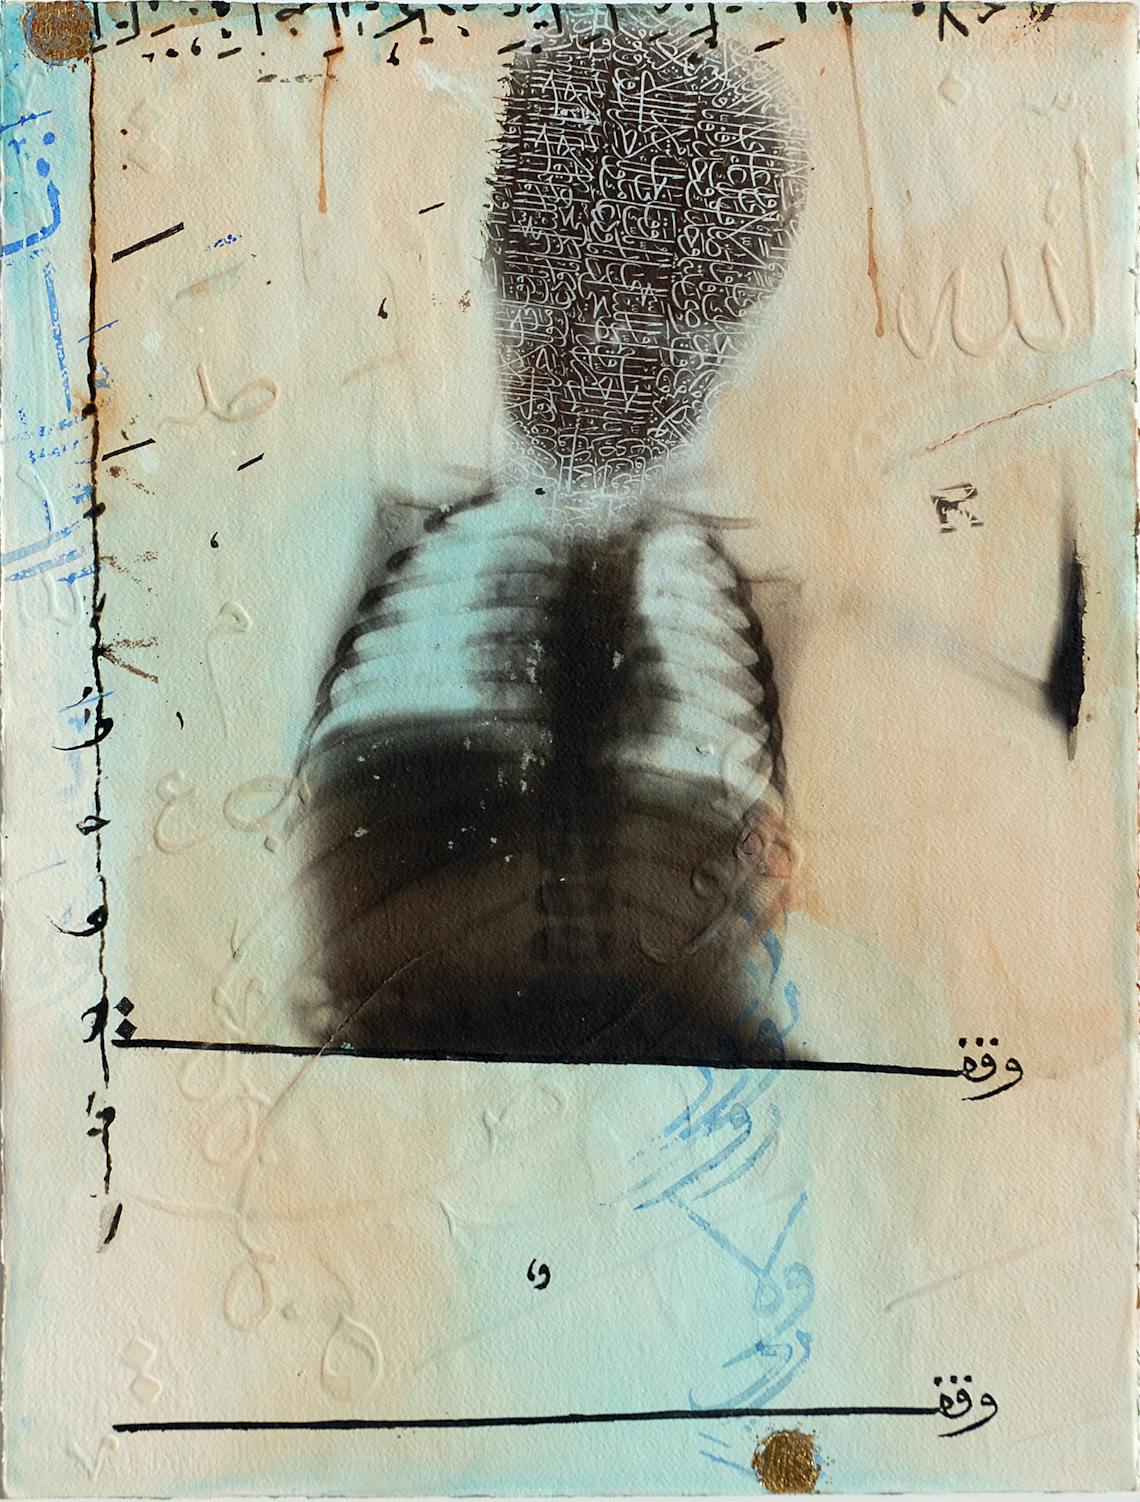 Mashq X Ray I 2008 Ahmed Mater Gold lead tea pomegranate Dupont Chinese ink and offset X Ray print and mixed media on archival Arche paper 100 x 70 H100 CM x W 70 CM